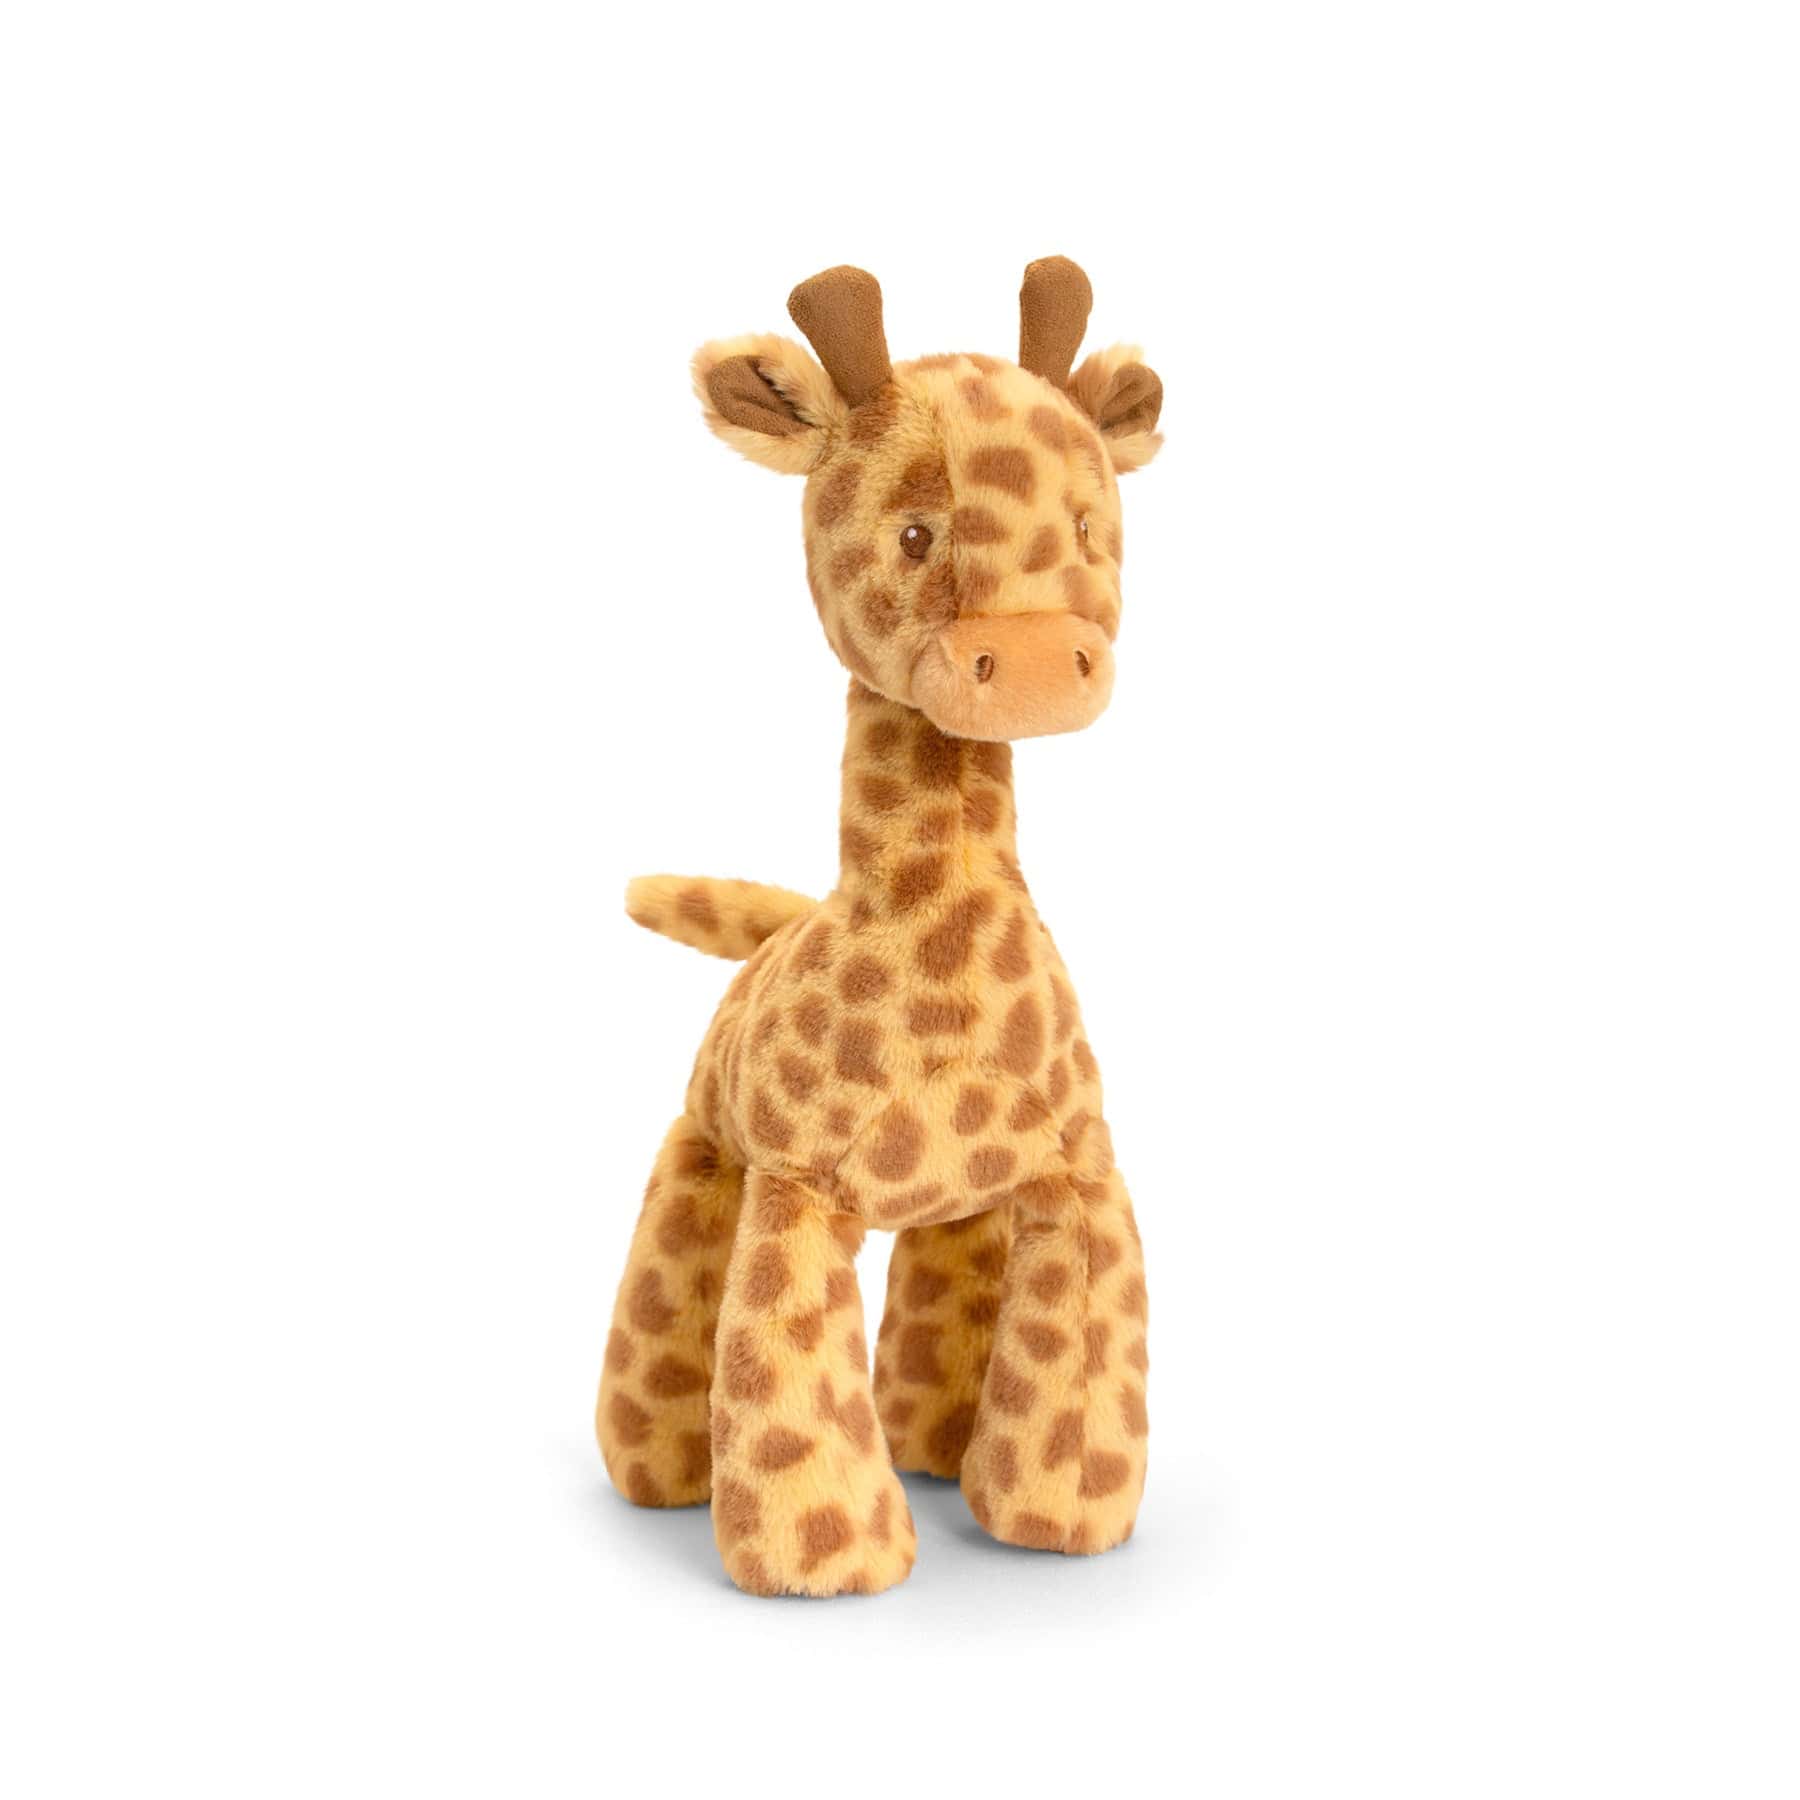 Plush giraffe toy with spotted fur standing isolated on white background, soft stuffed animal for children.